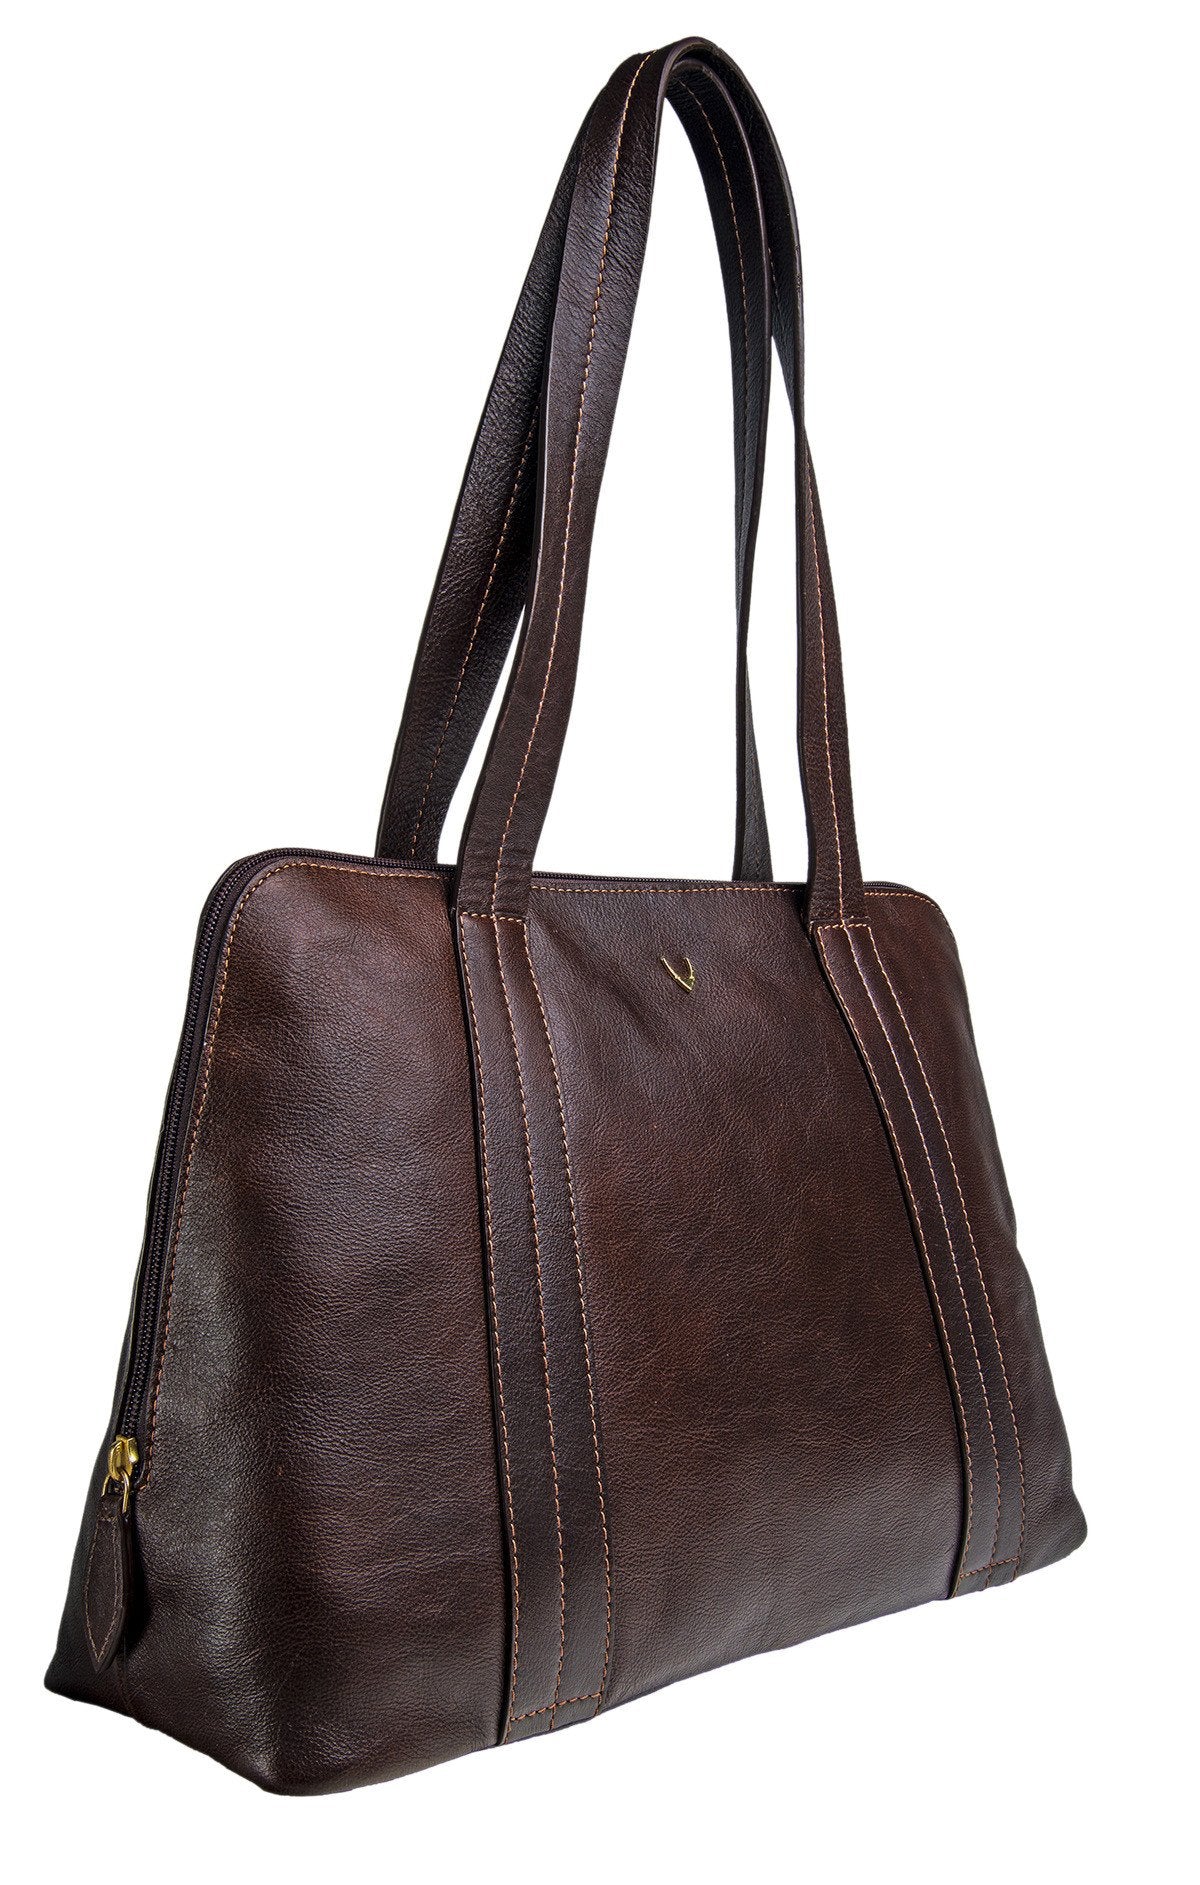 Cerys Large Leather Multi-Compartment Tote - Mercantile Mountain